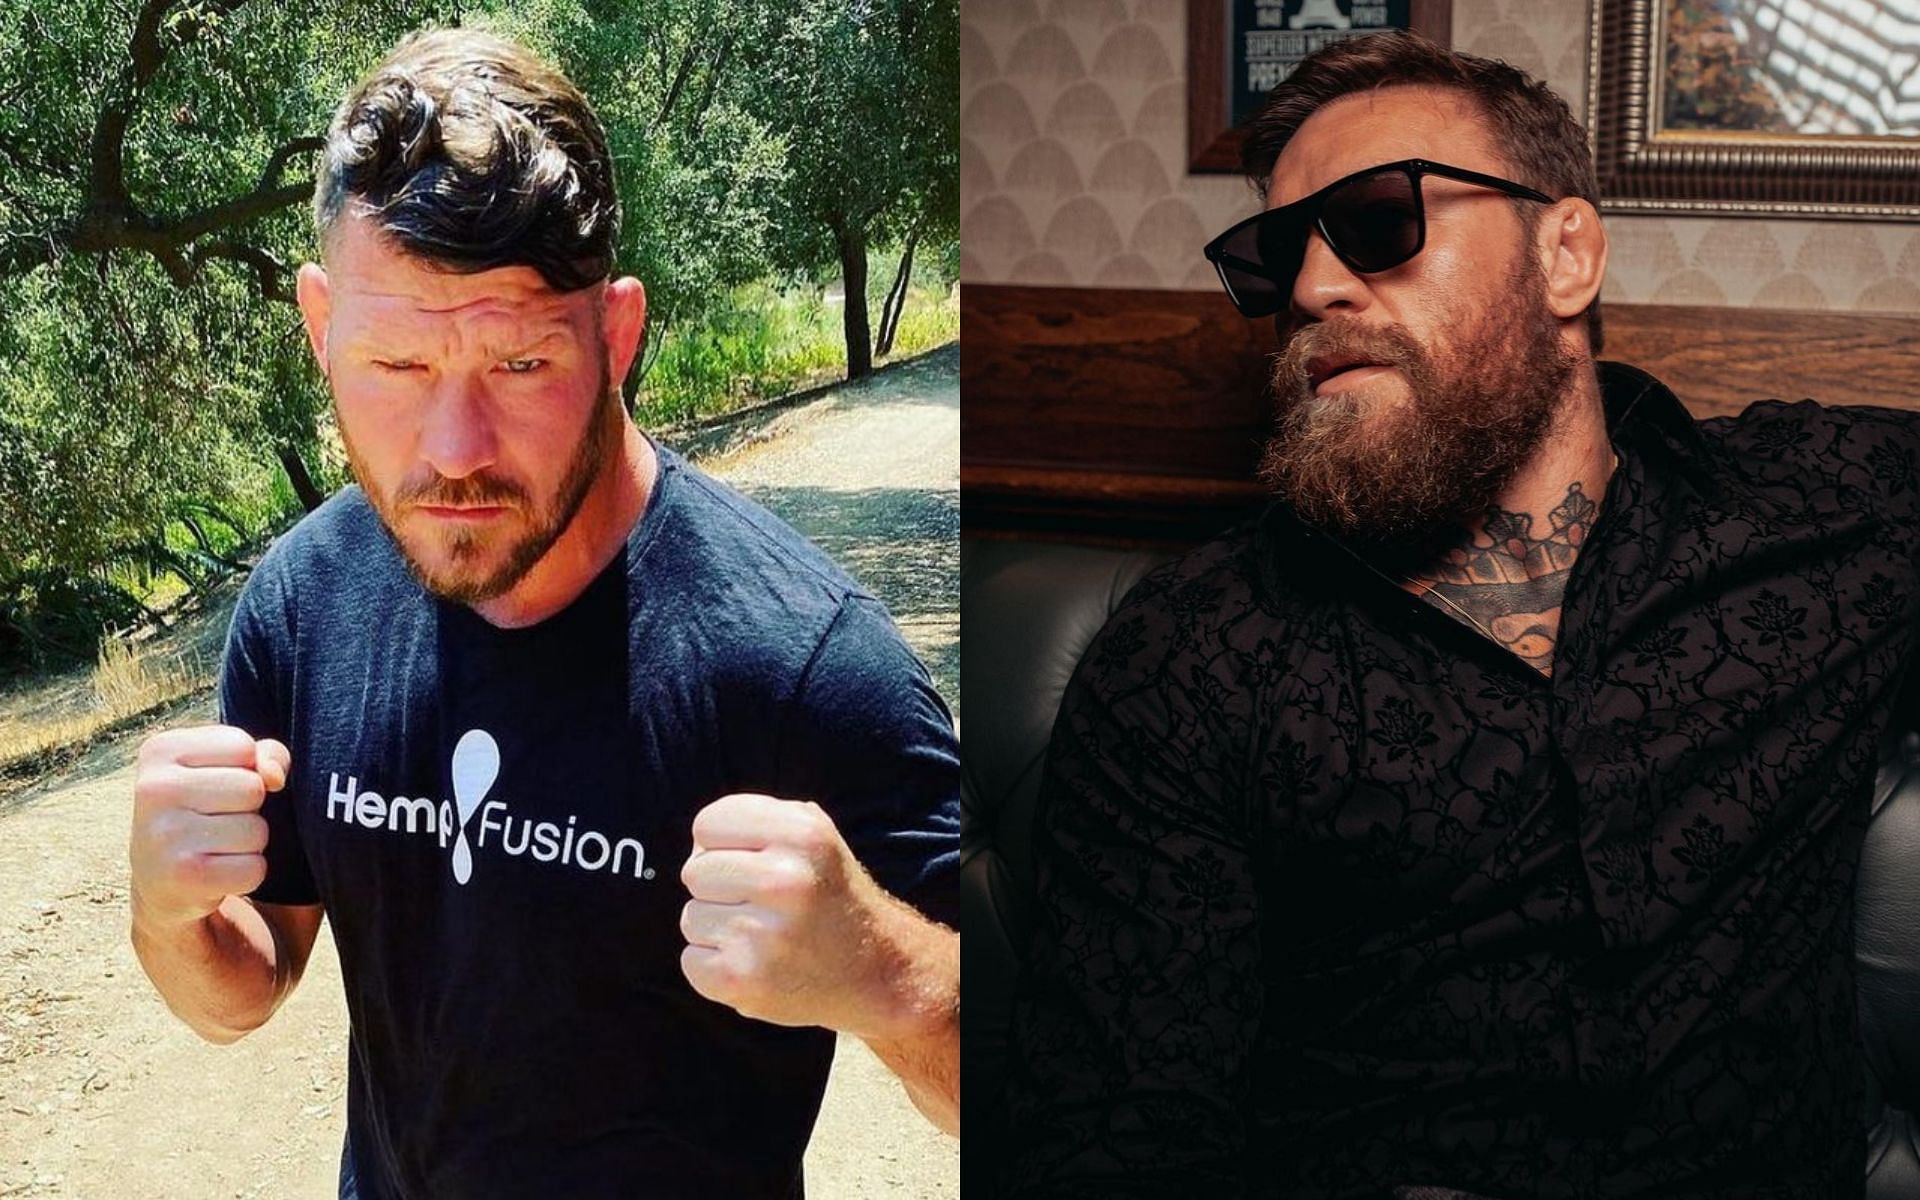 Michael Bisping (Left), Conor McGregor (Right) [Image courtesy: @mikebisping and @thenotoriousmma on Instagram]